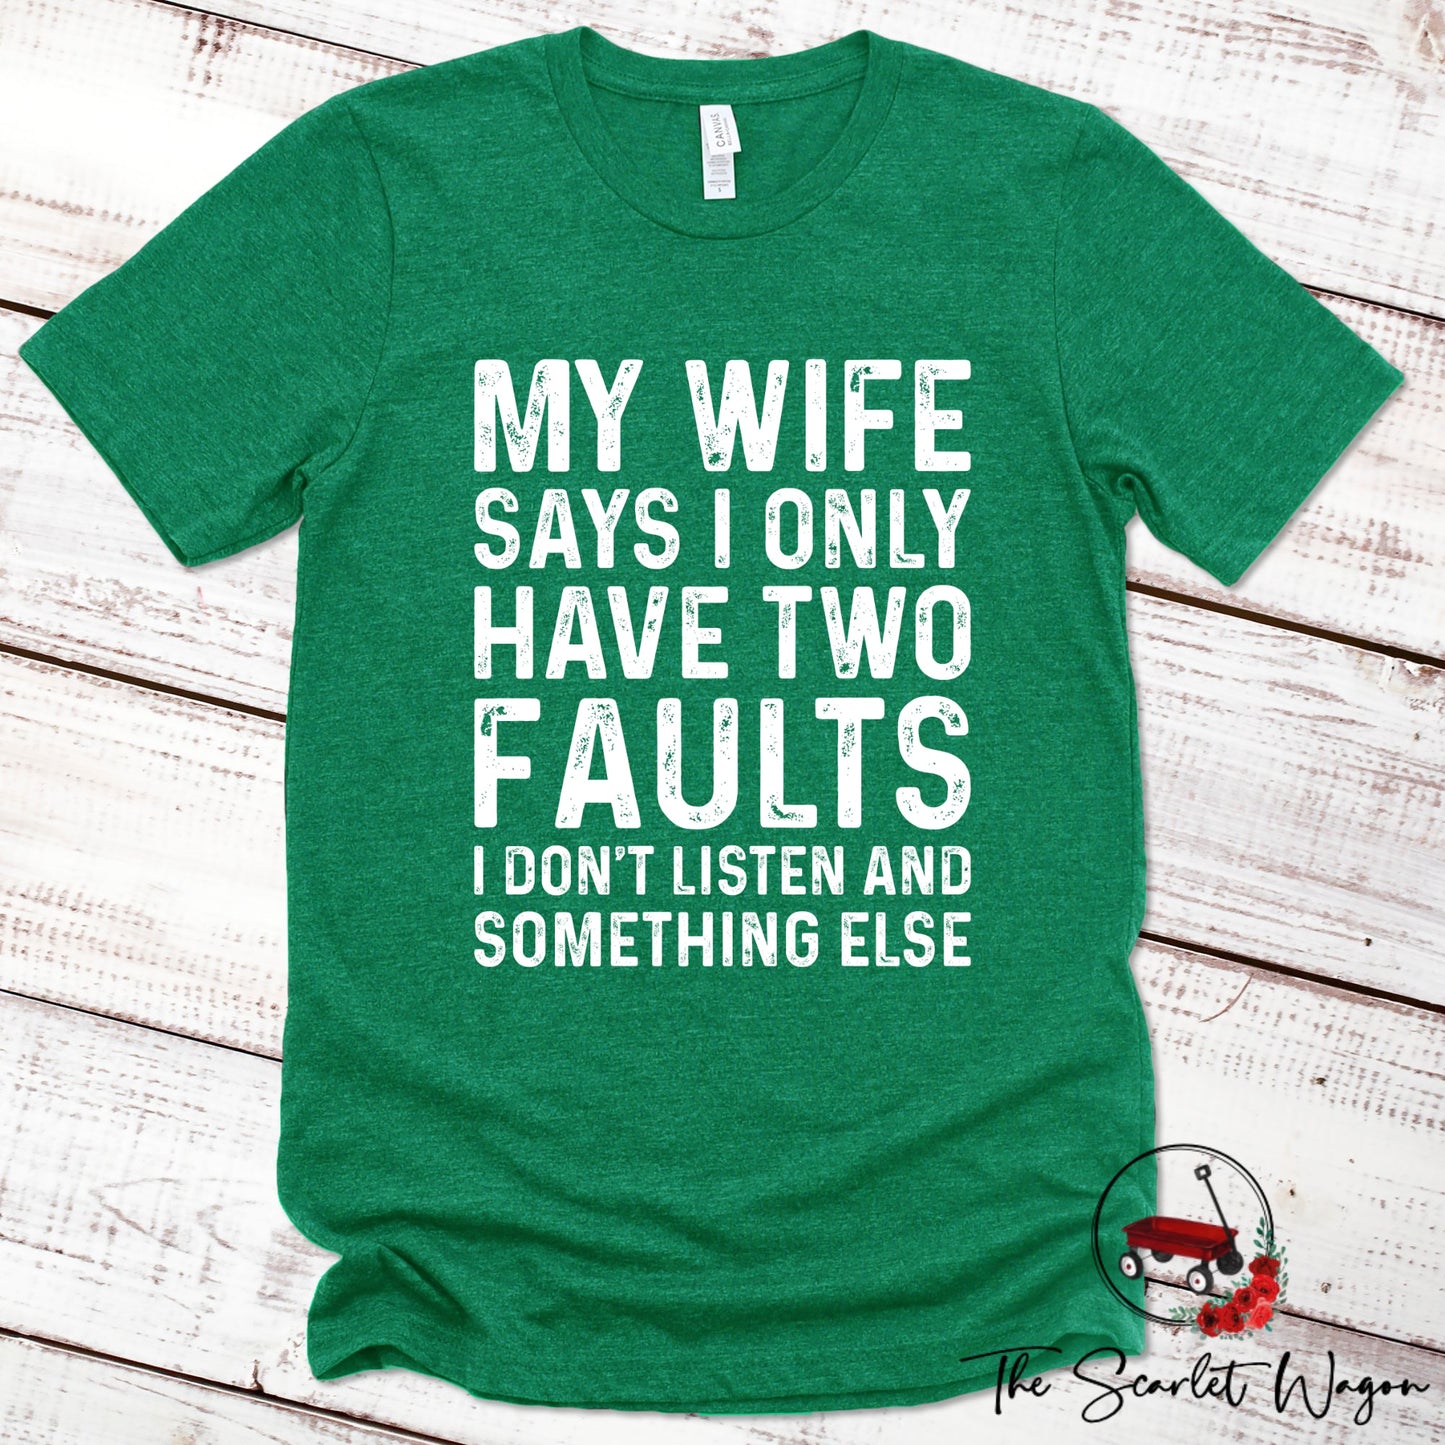 My Wife Says I Have Two Faults Premium Tee Scarlet Wagon Heather Green XS 